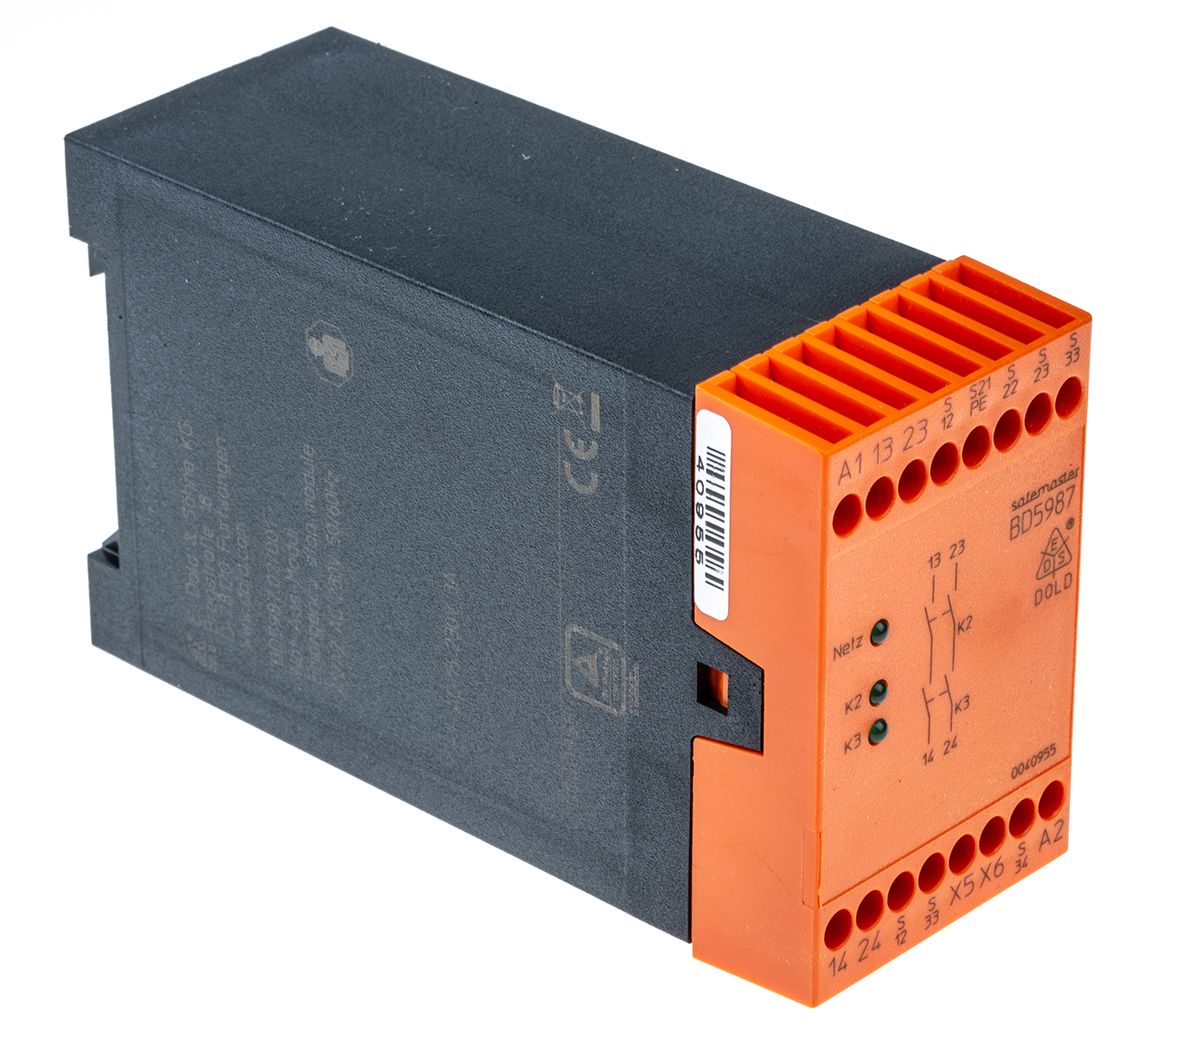 Dold BD 5987 Series Dual-Channel Emergency Stop Safety Relay, 230V ac, 2 Safety Contact(s)